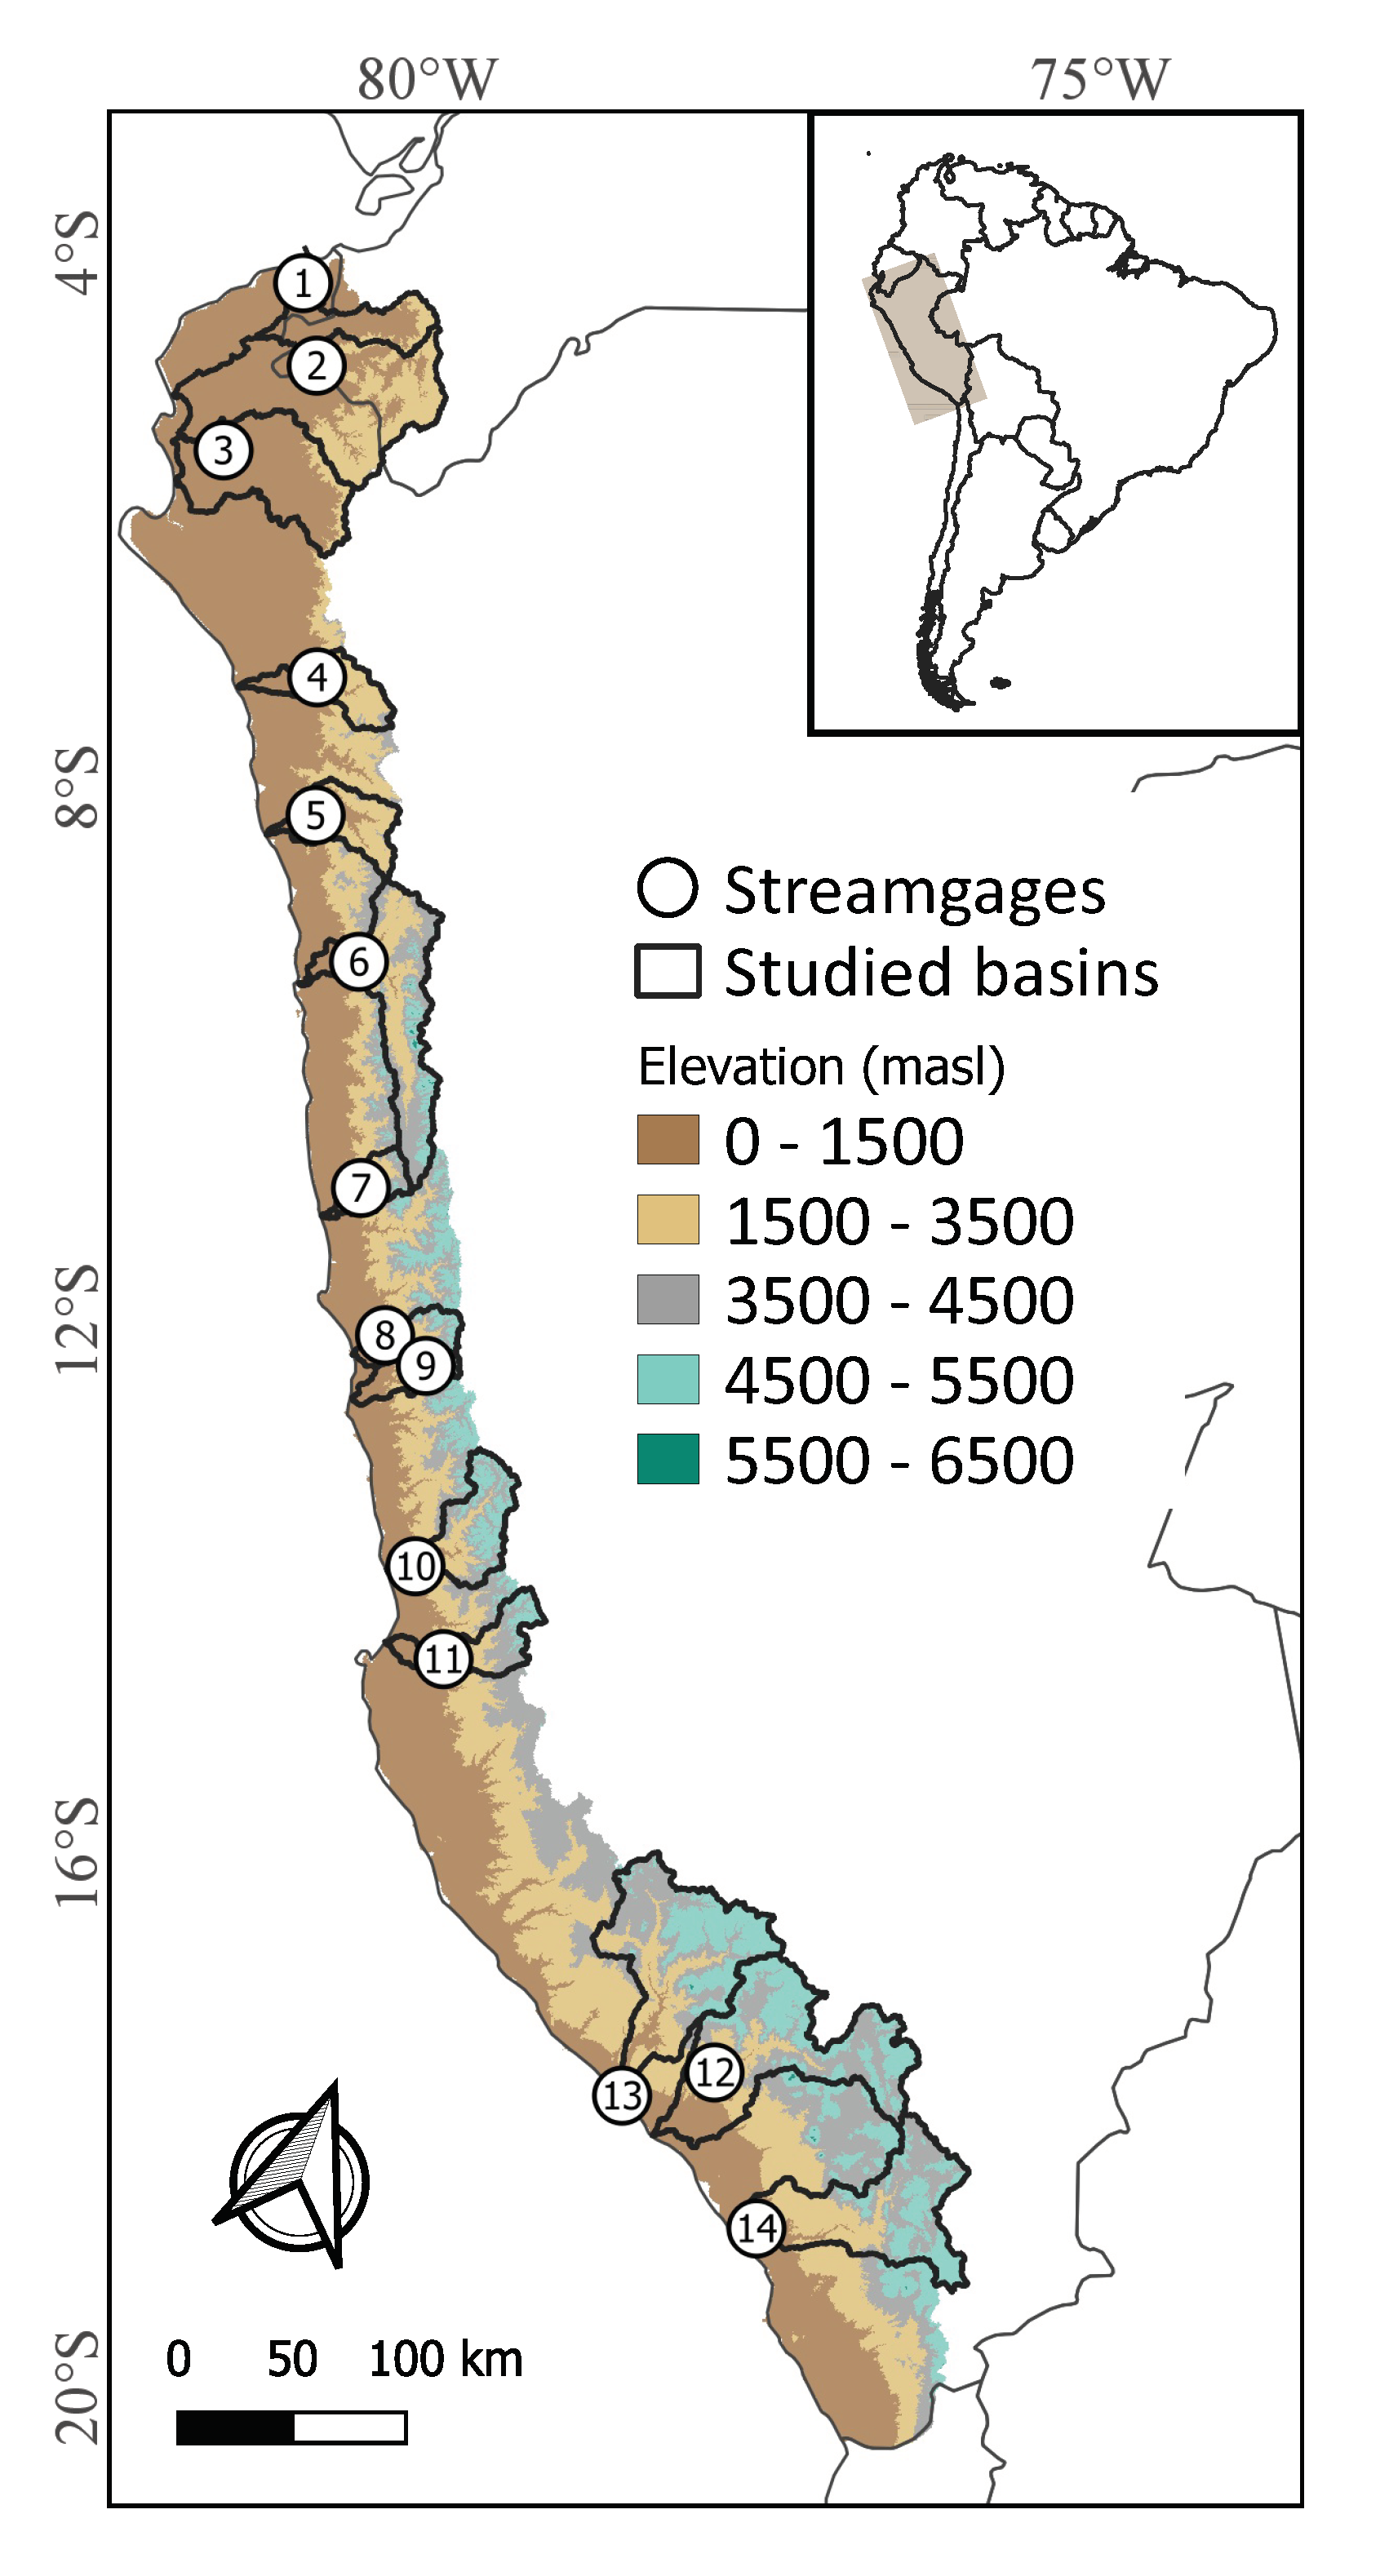 Water | Free Full-Text | Regional Parameter Estimation of the SWAT Model:  Methodology and Application to River Basins in the Peruvian Pacific Drainage